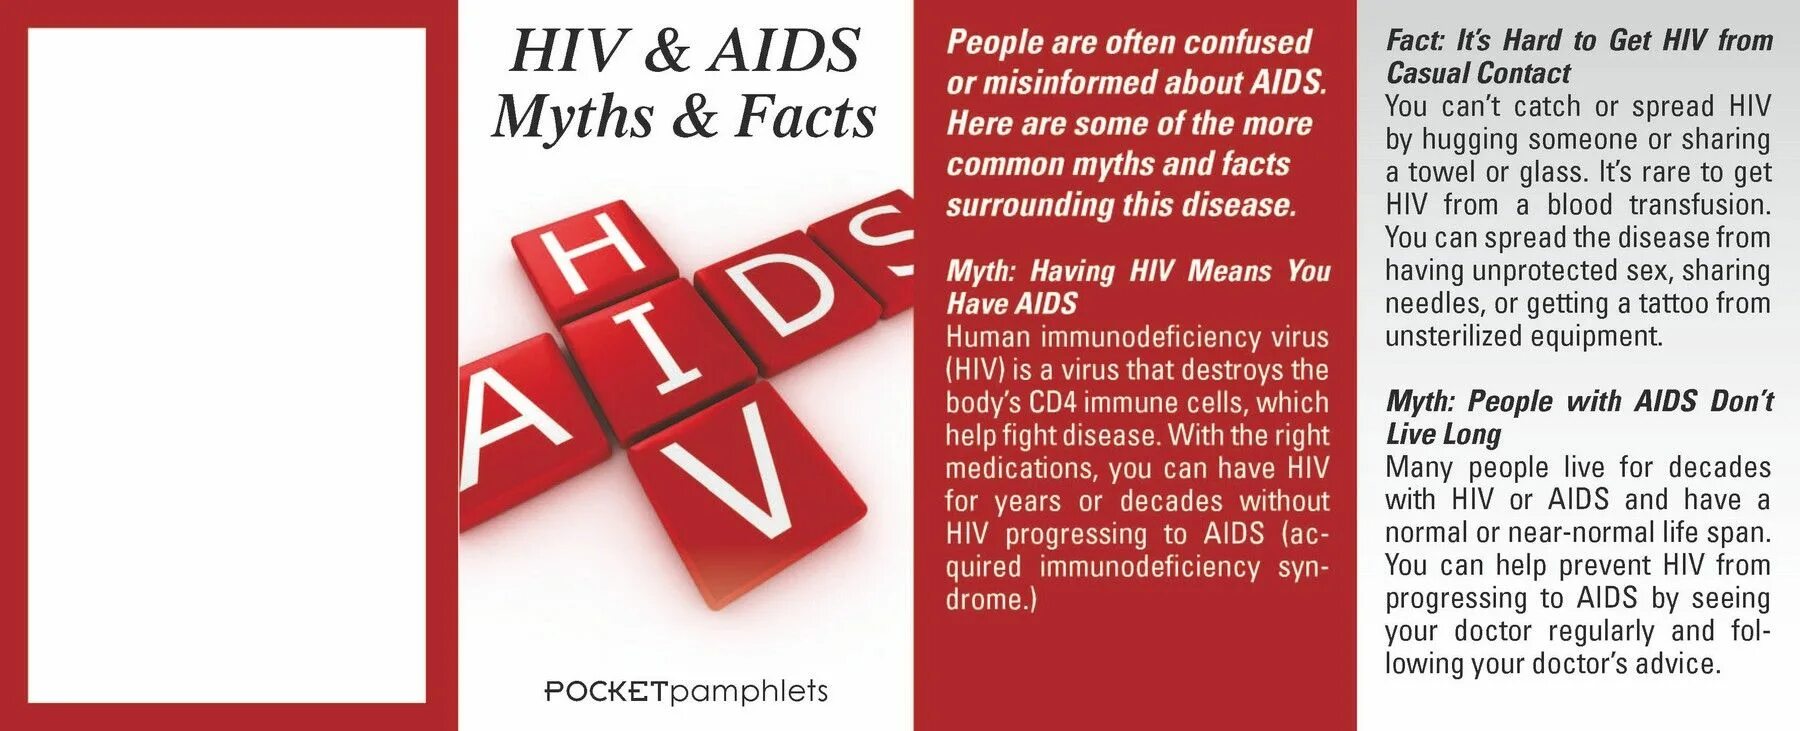 Скоро спид ап. About AIDS. HIV AIDS. Myths about HIV and AIDS. Pamphlet for HIV.